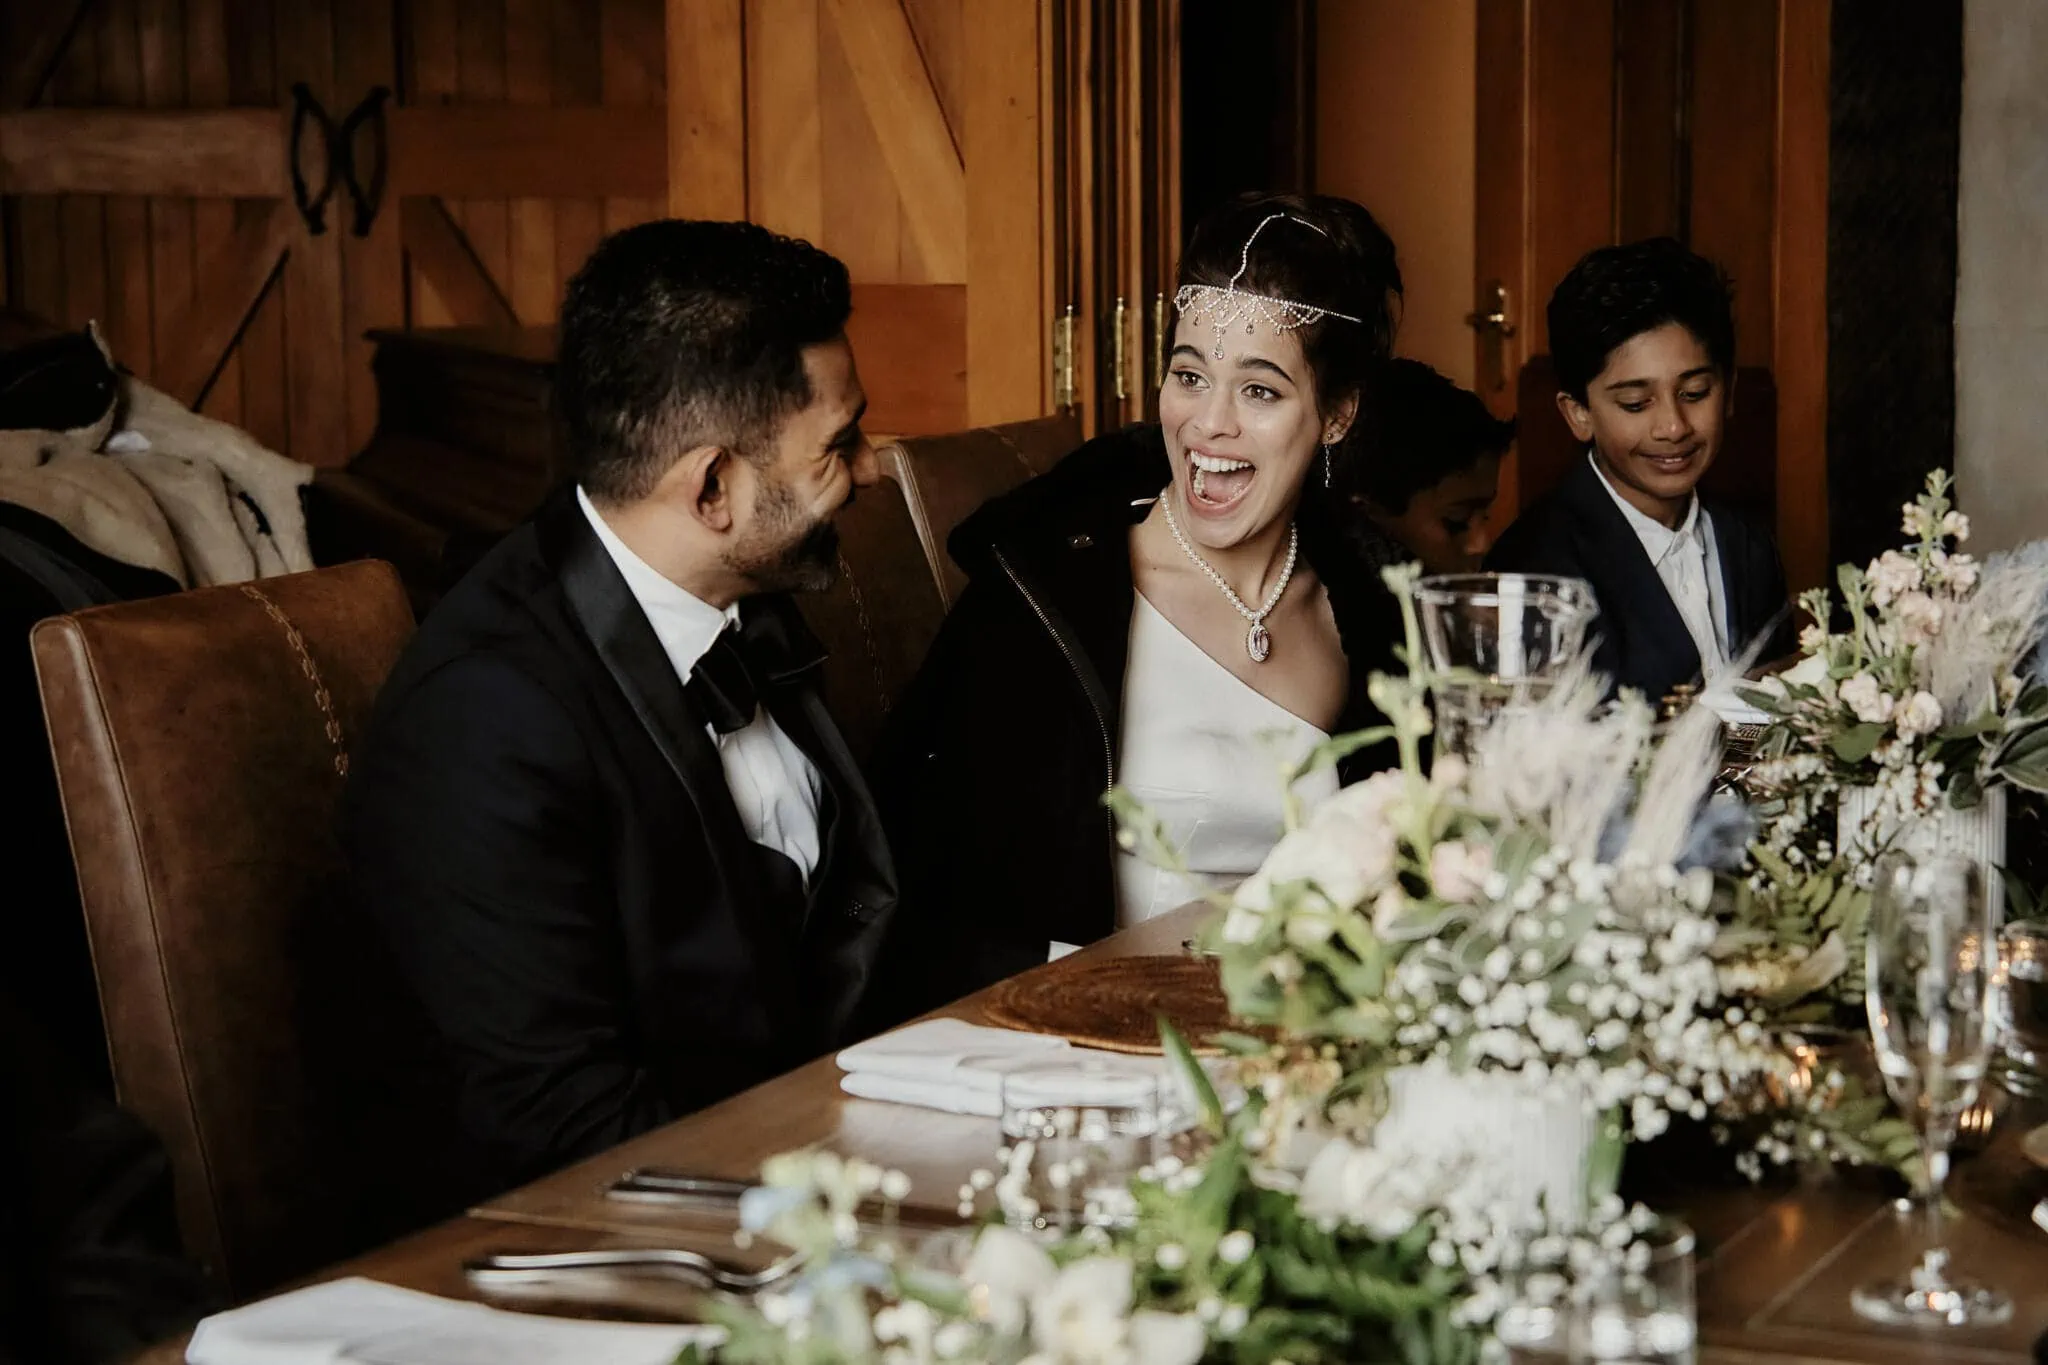 Queenstown New Zealand Elopement Wedding Photographer - Keywords: bride, groom, dinner table

Description: Wasim and Yumn laughing at their dinner table during their Queenstown Islamic wedding.